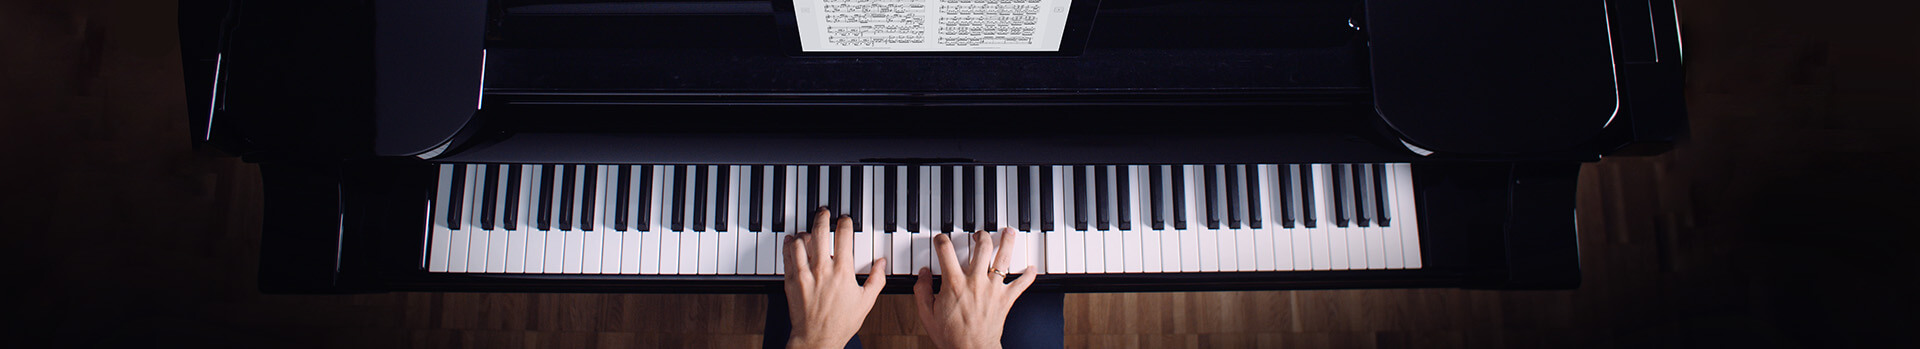 Start learning the piano now - this sheet music is perfect for beginners! 